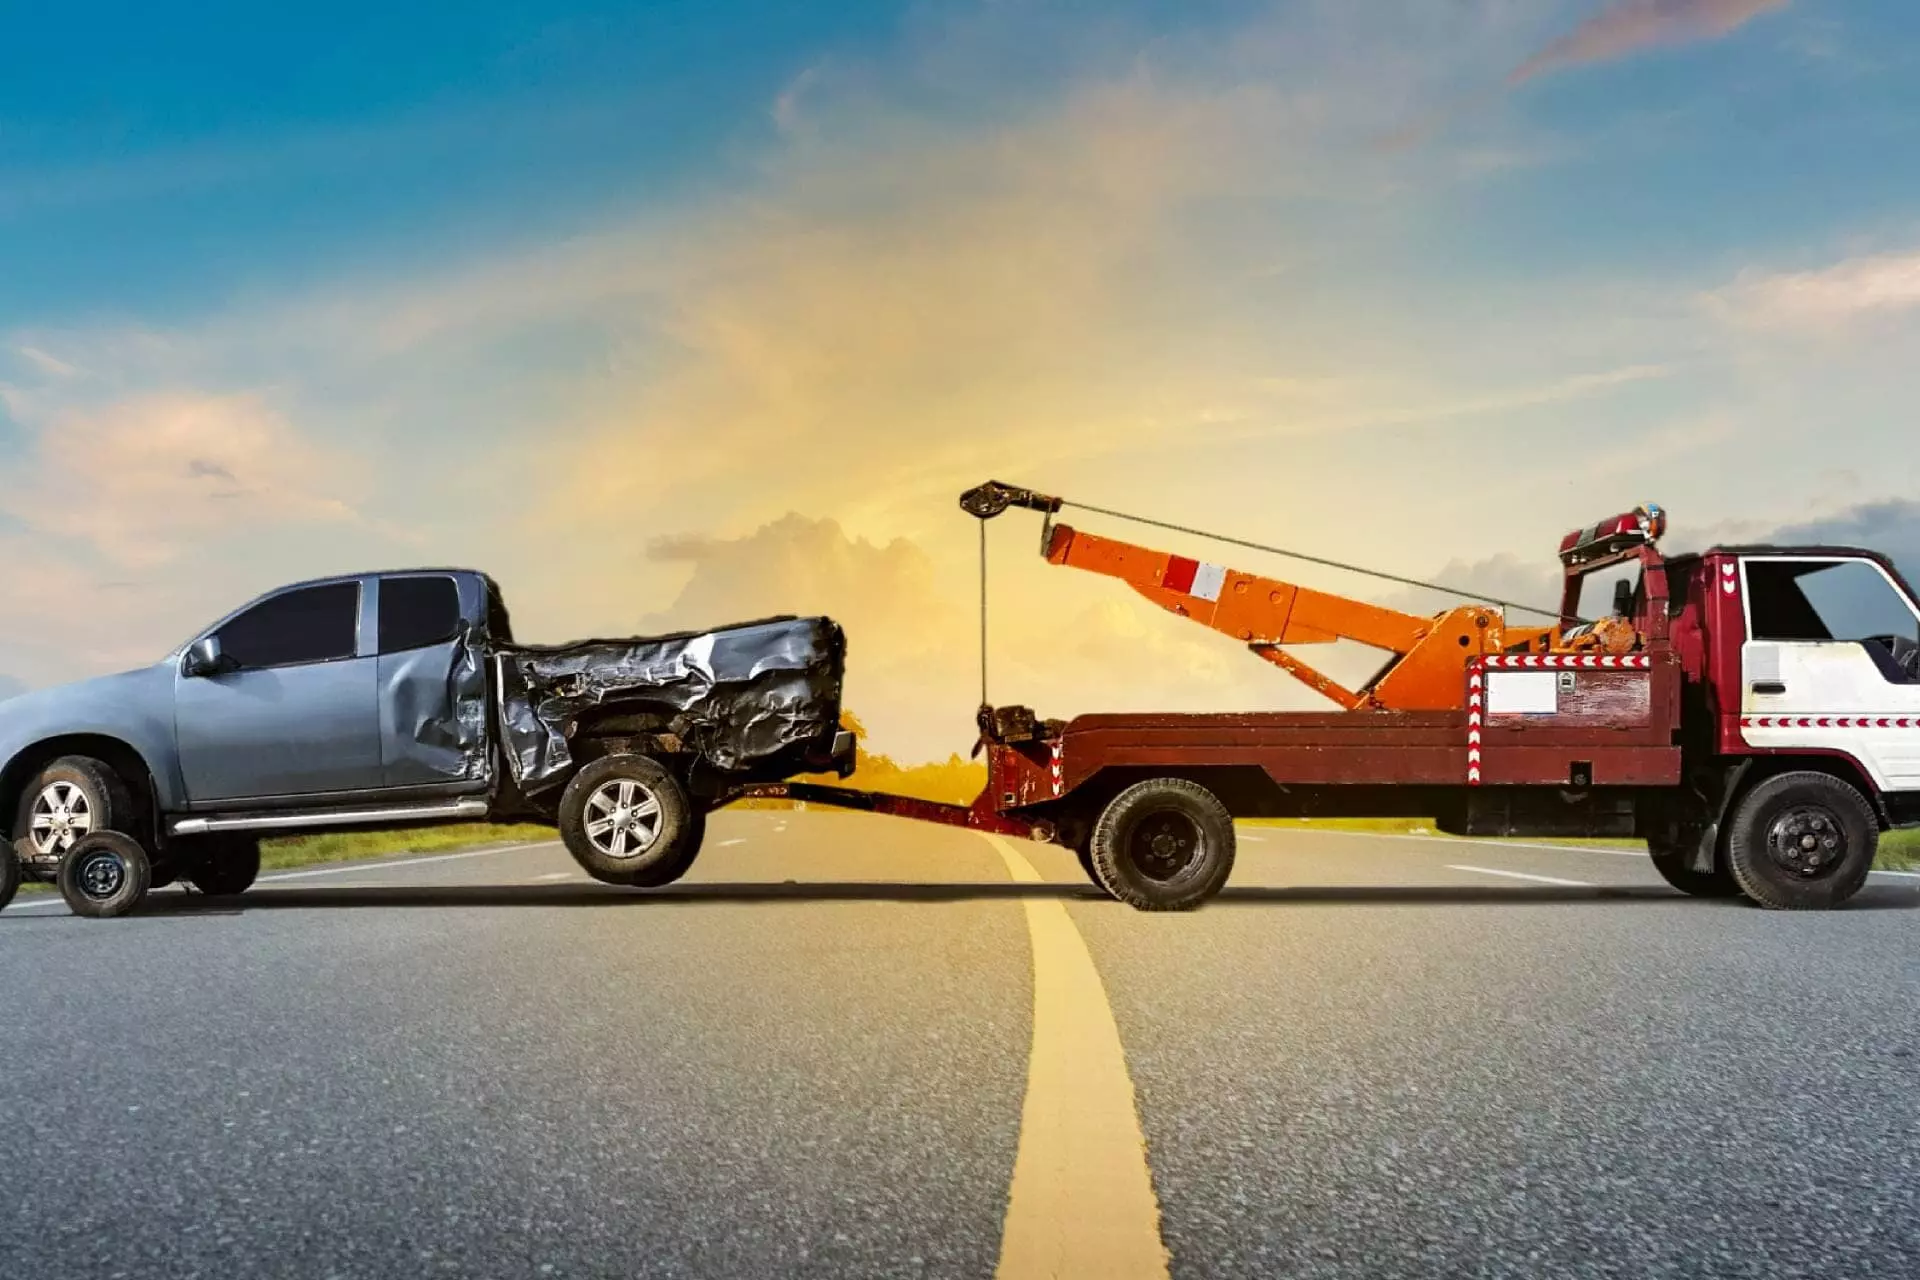 Ways to Determine Value of your Scrap Car: Junk Car Towing